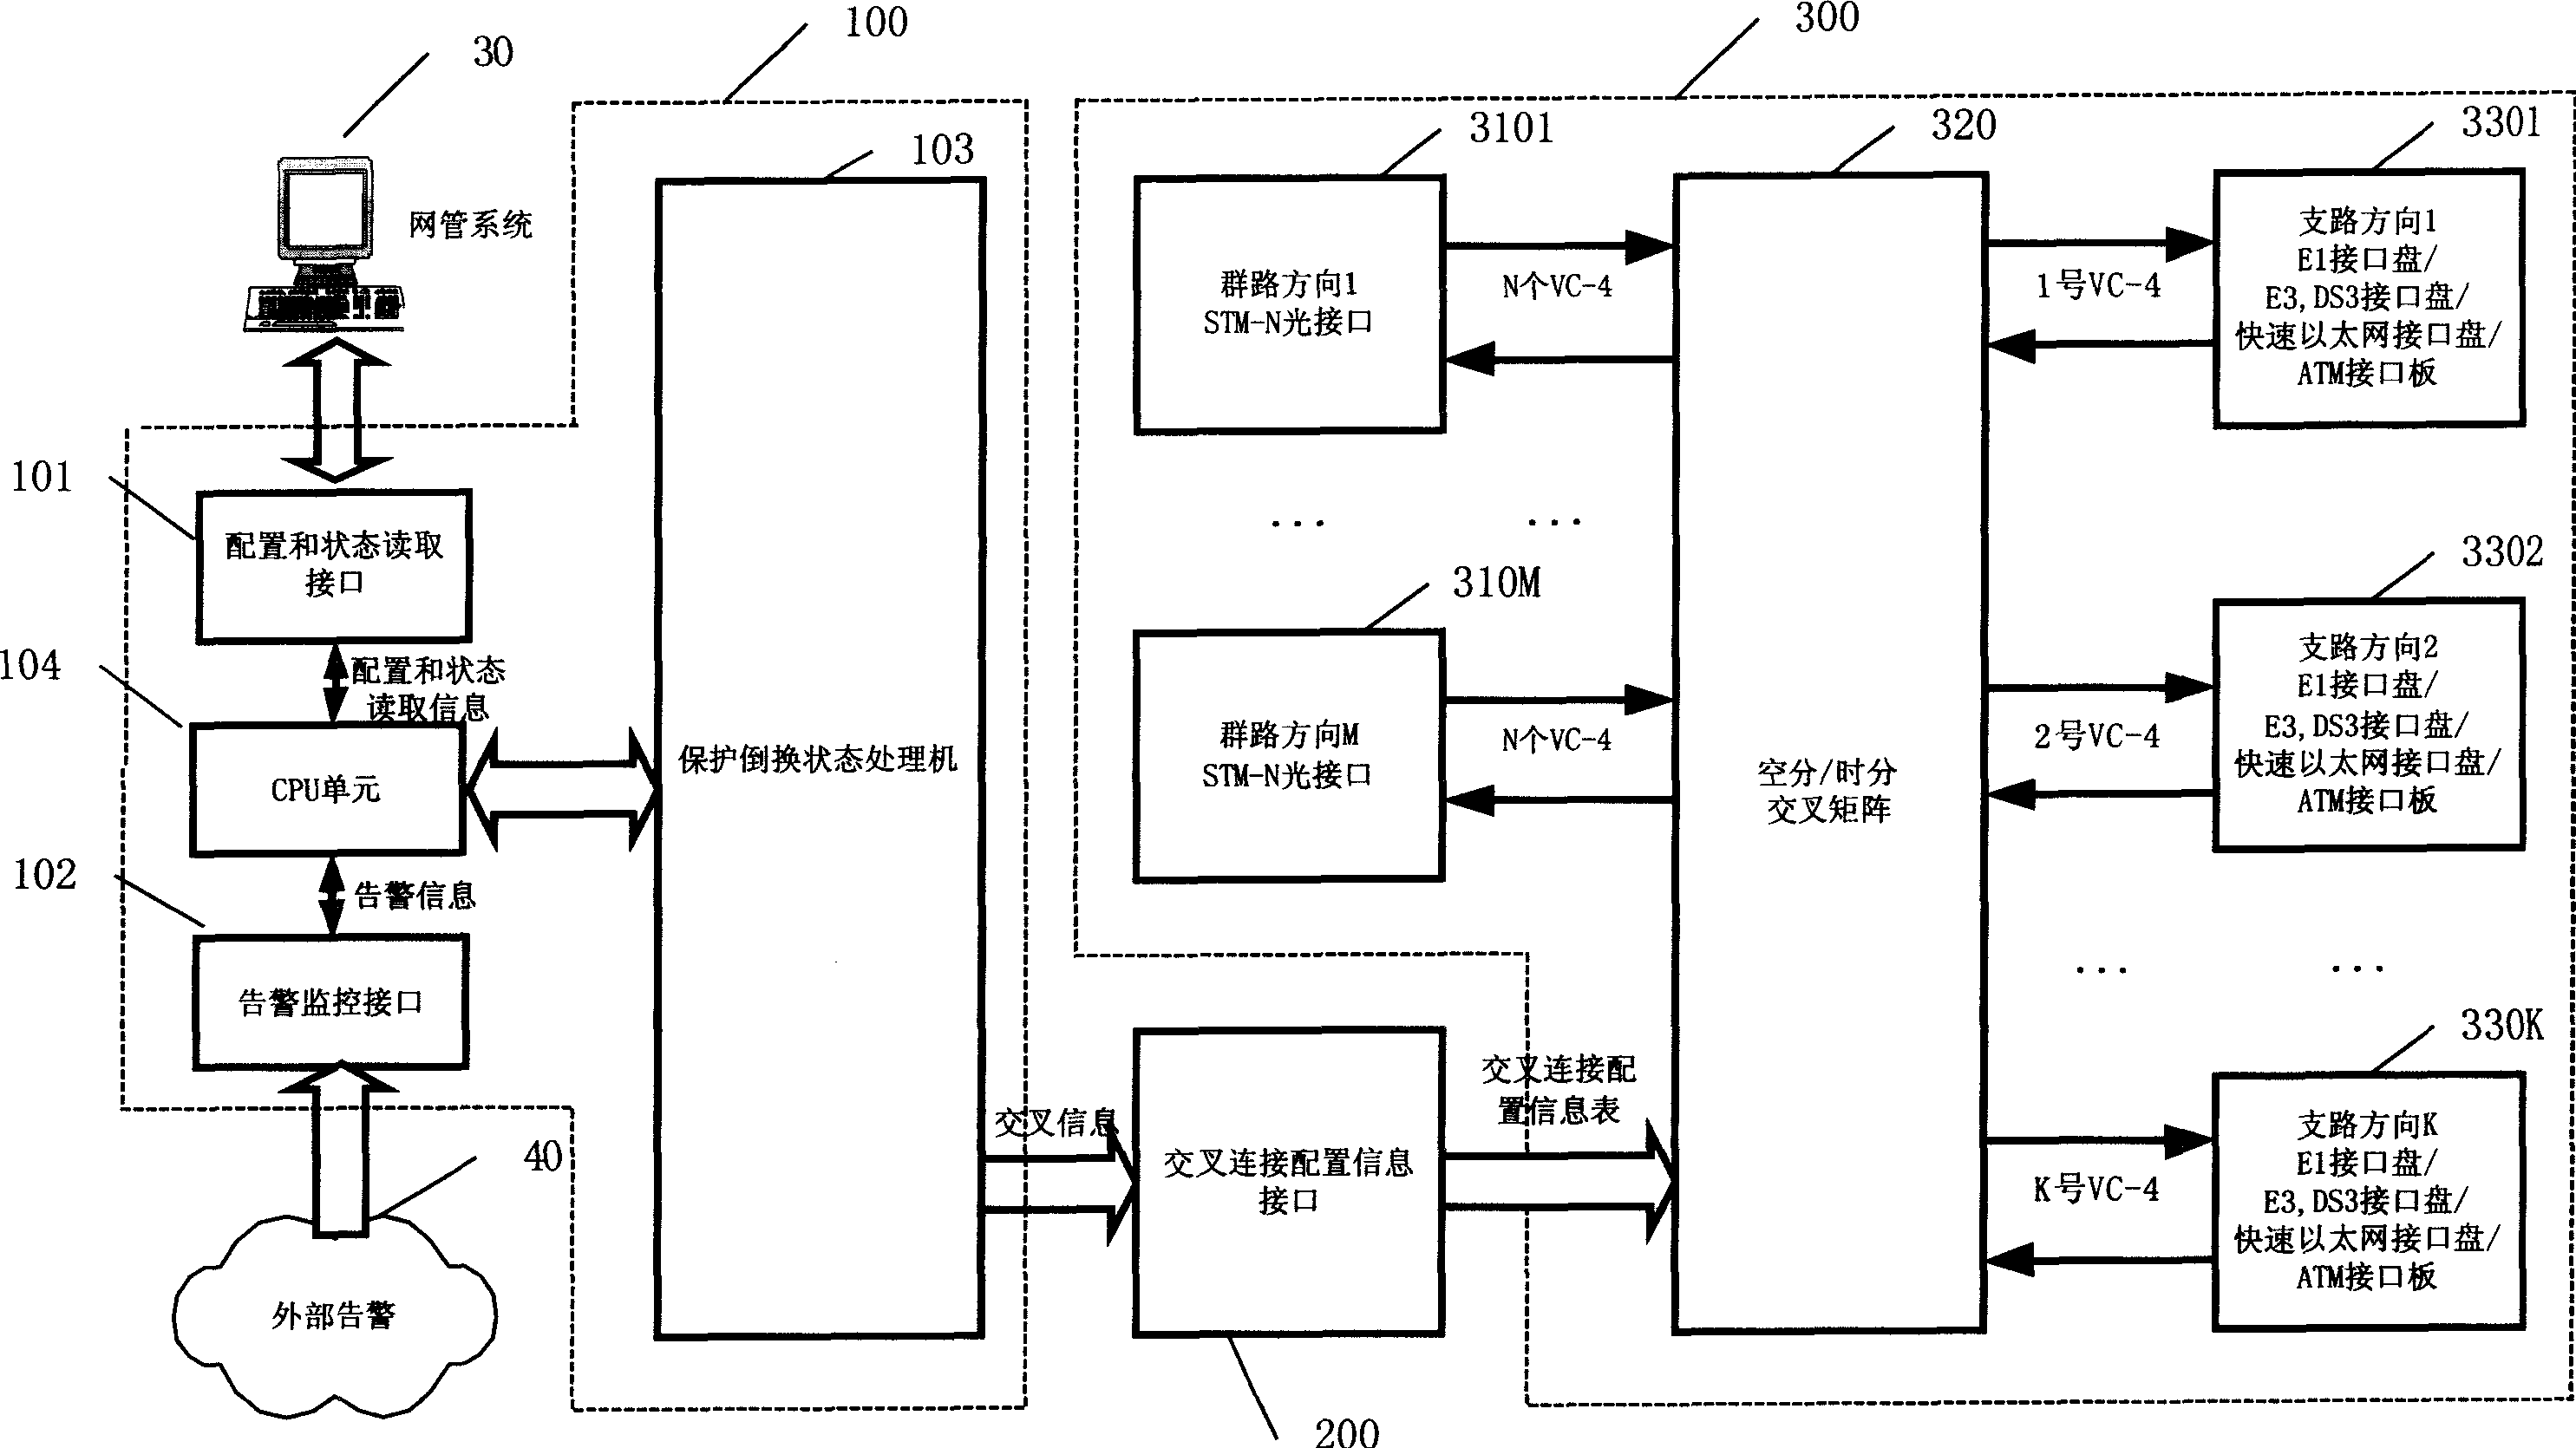 A cross connection system for implementing SDH service protection switching and automatic recovery